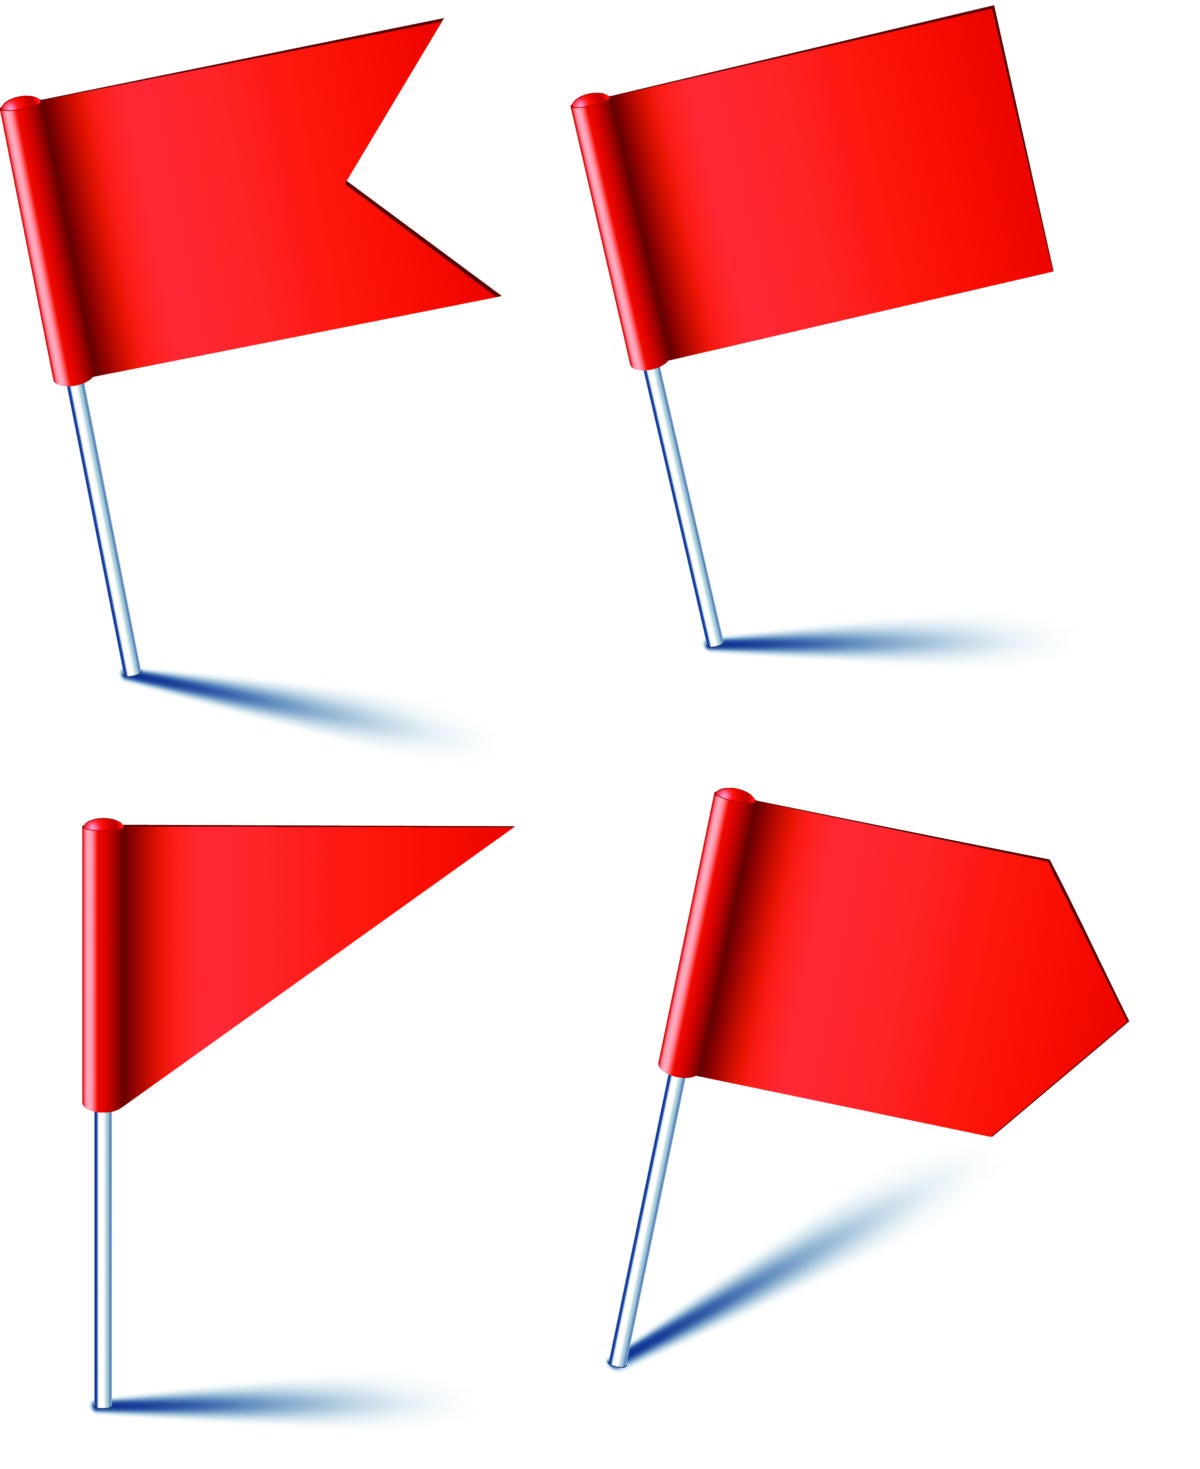 red pin flags. 125831534